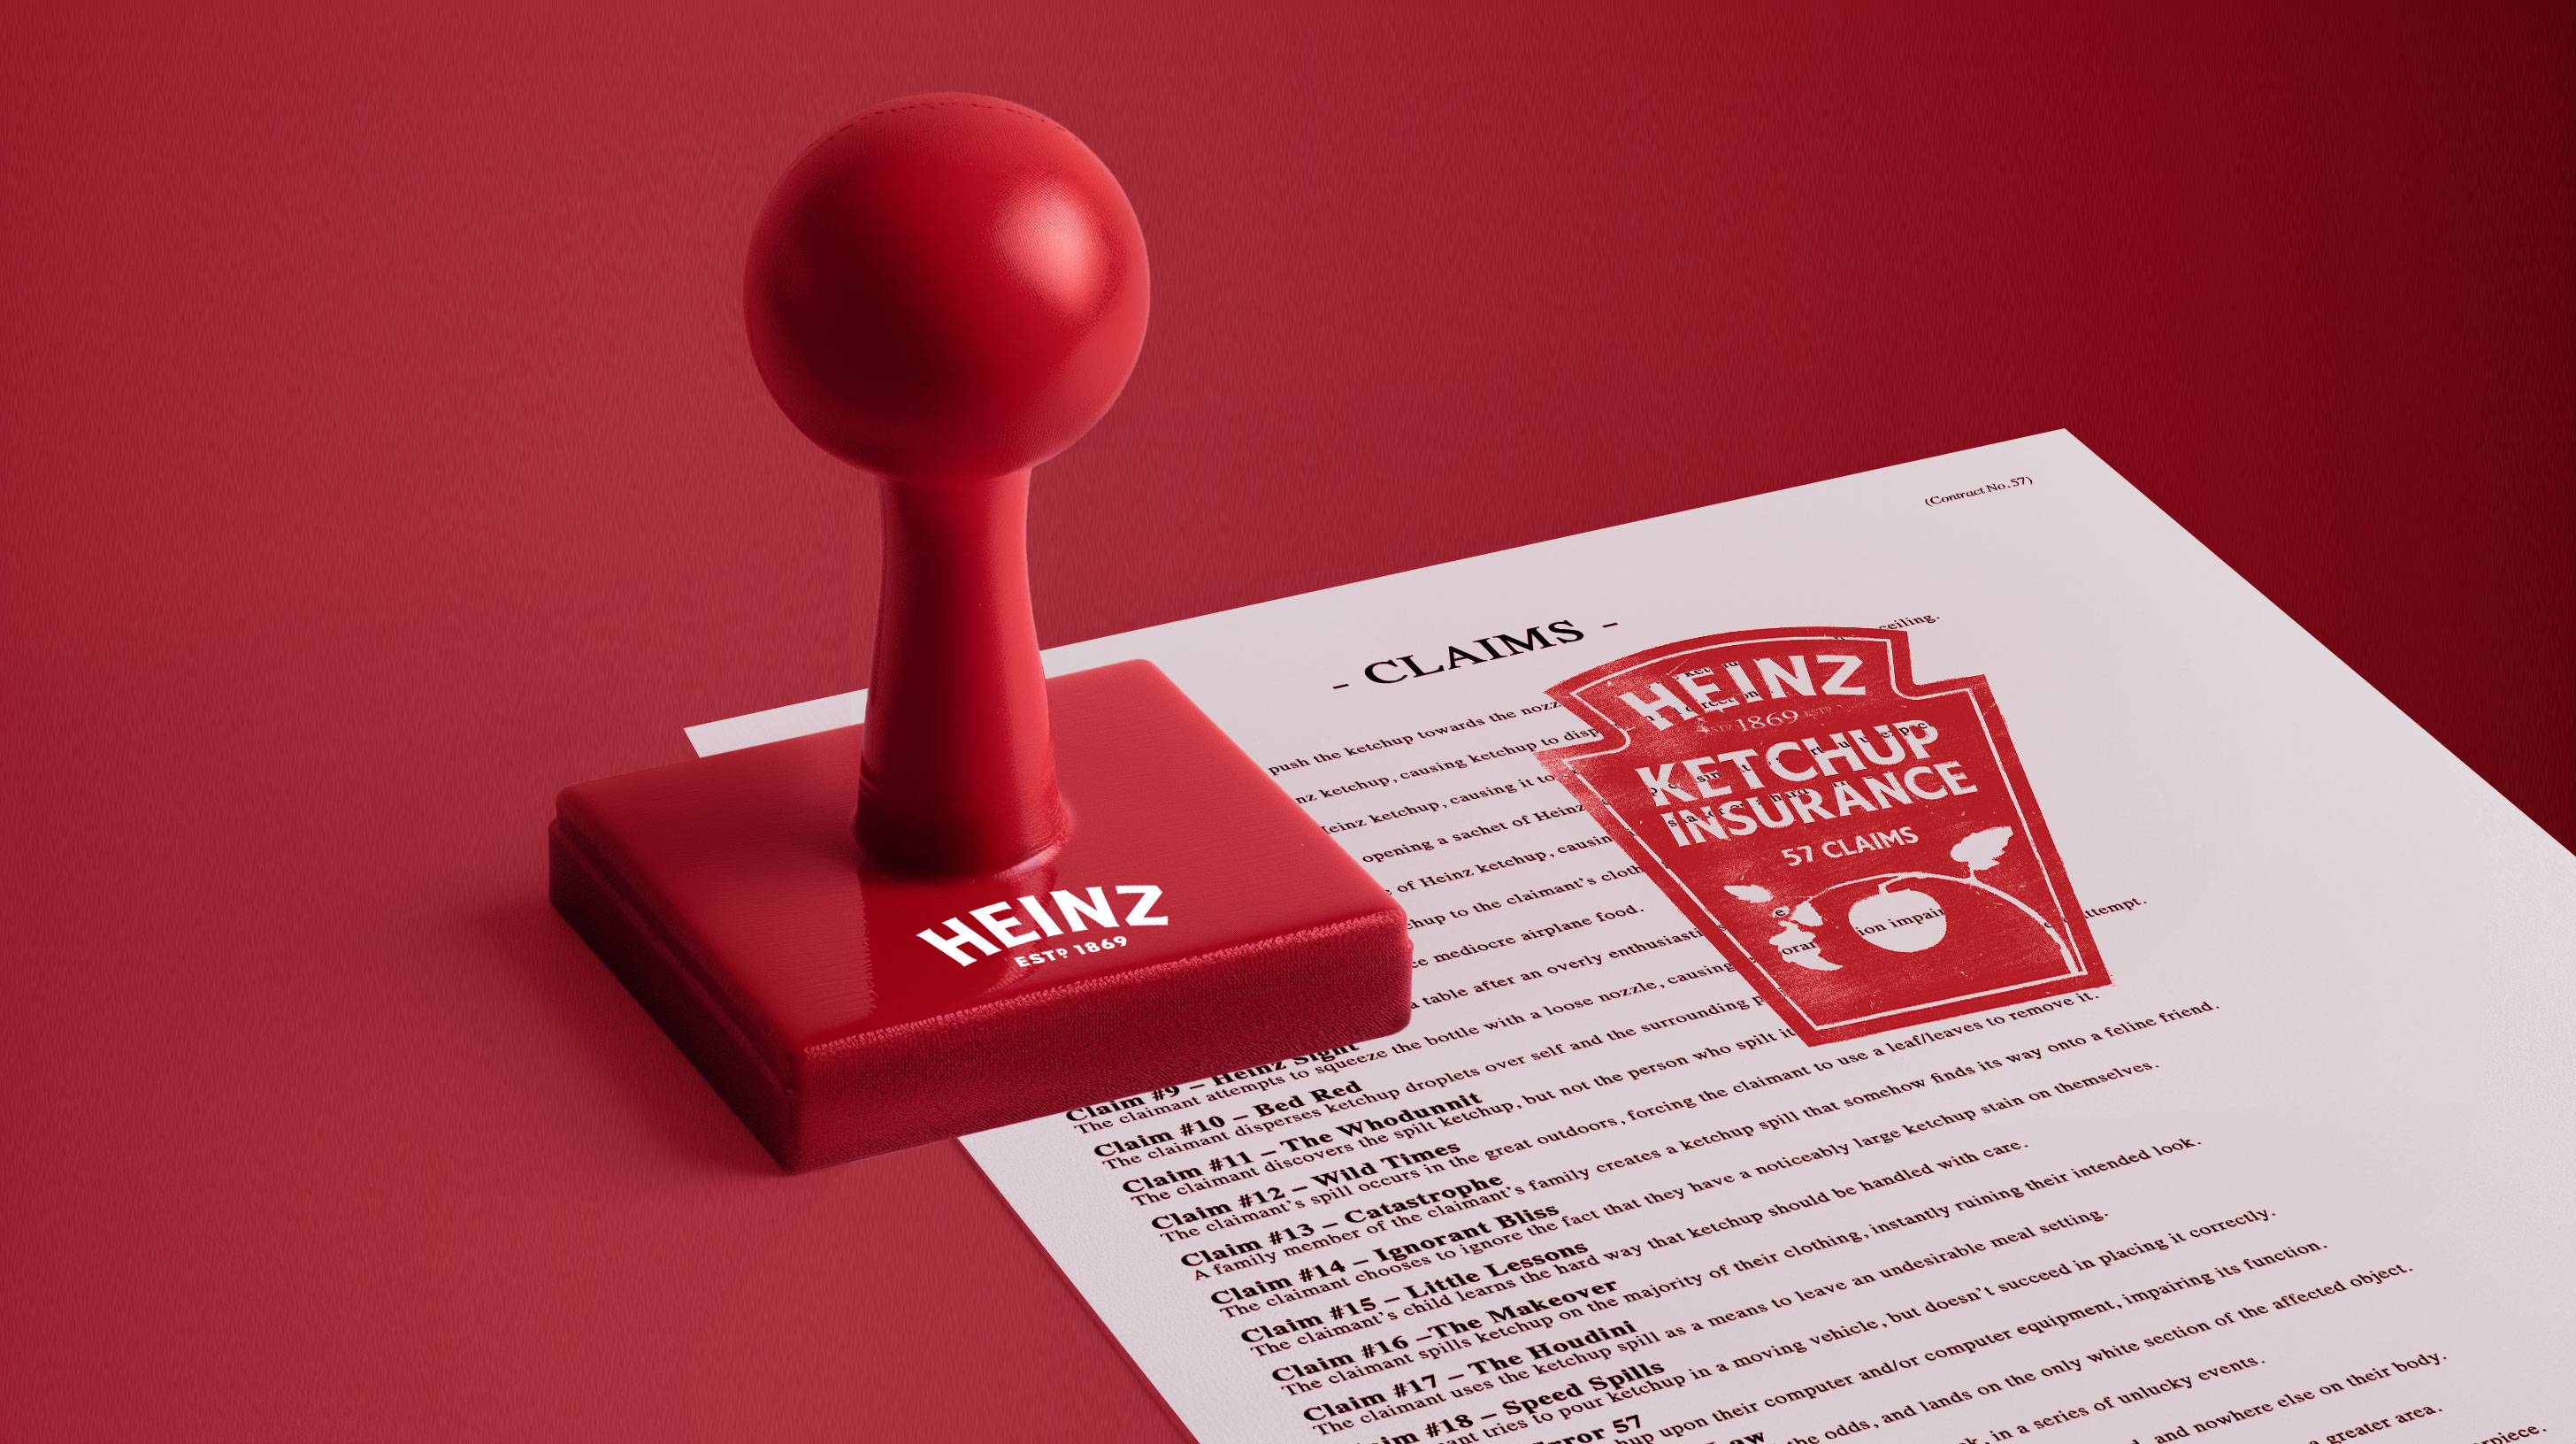 World’s First Ketchup Insurance Policy Launched by Heinz